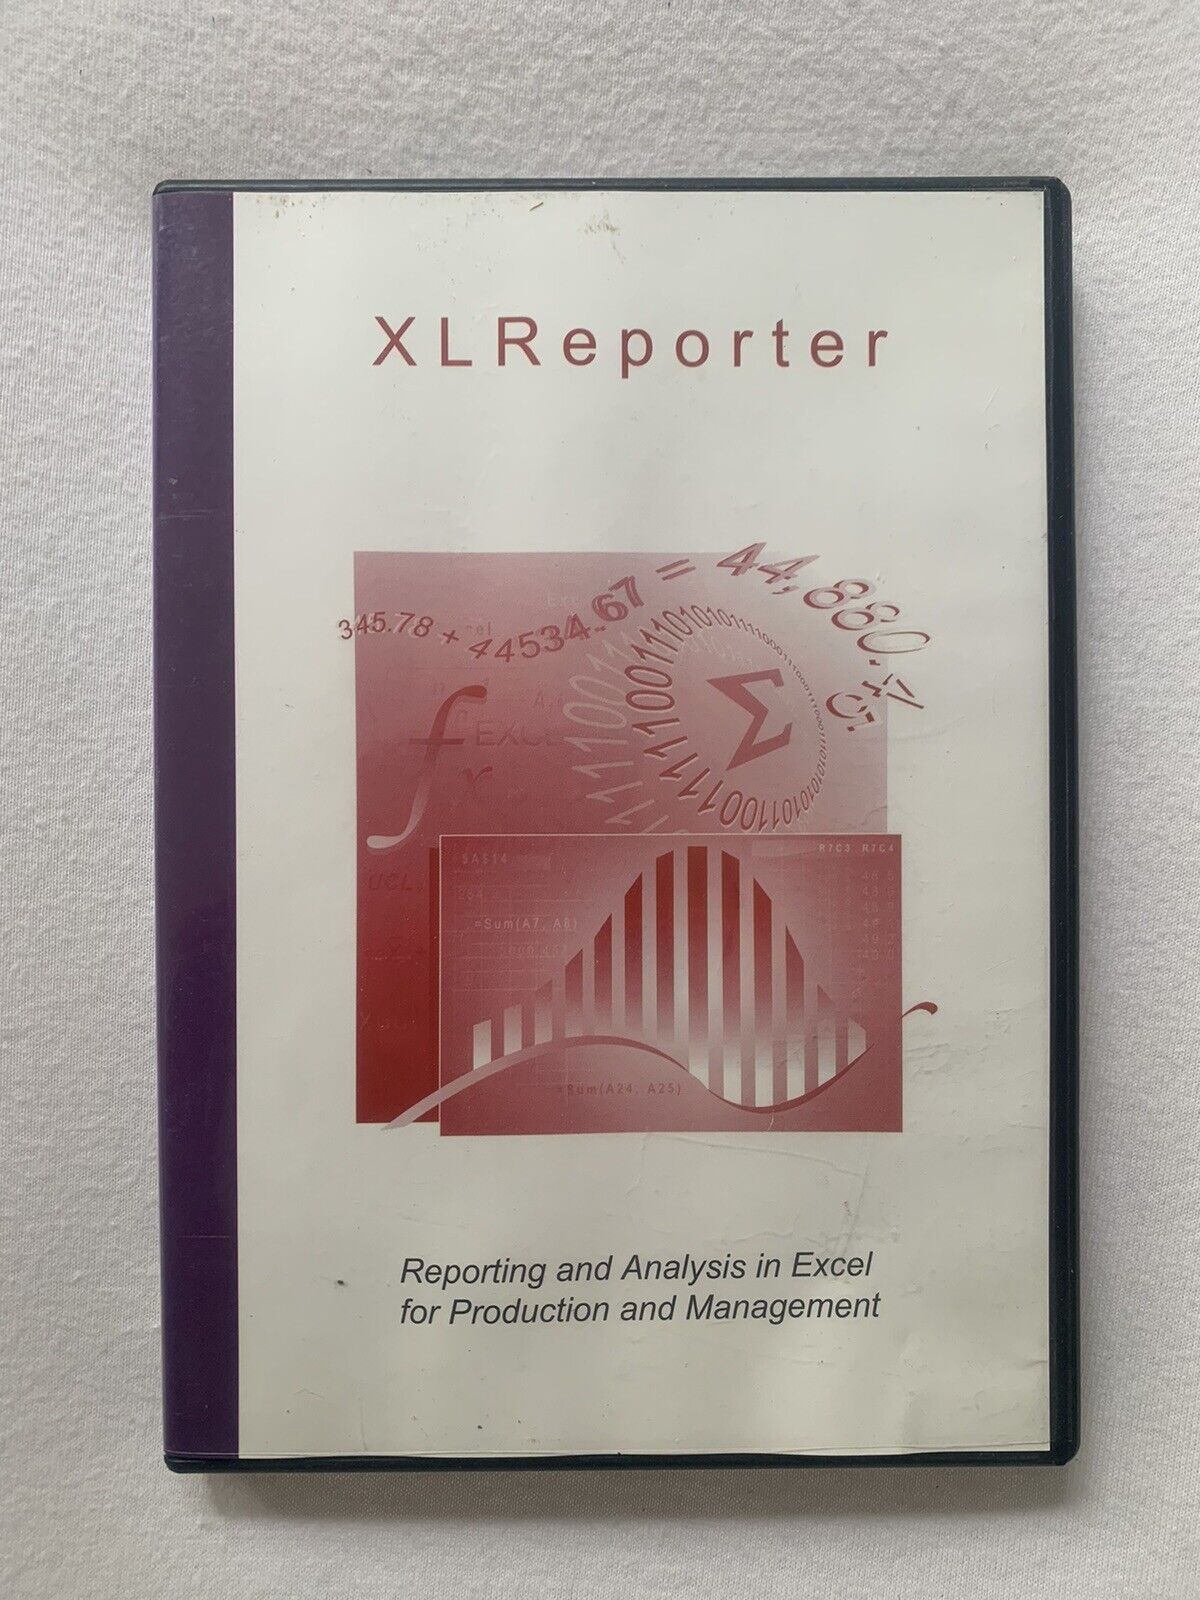 XL Reporter – Reporting And Analysis In Excel – SY Tech Inc. - CD